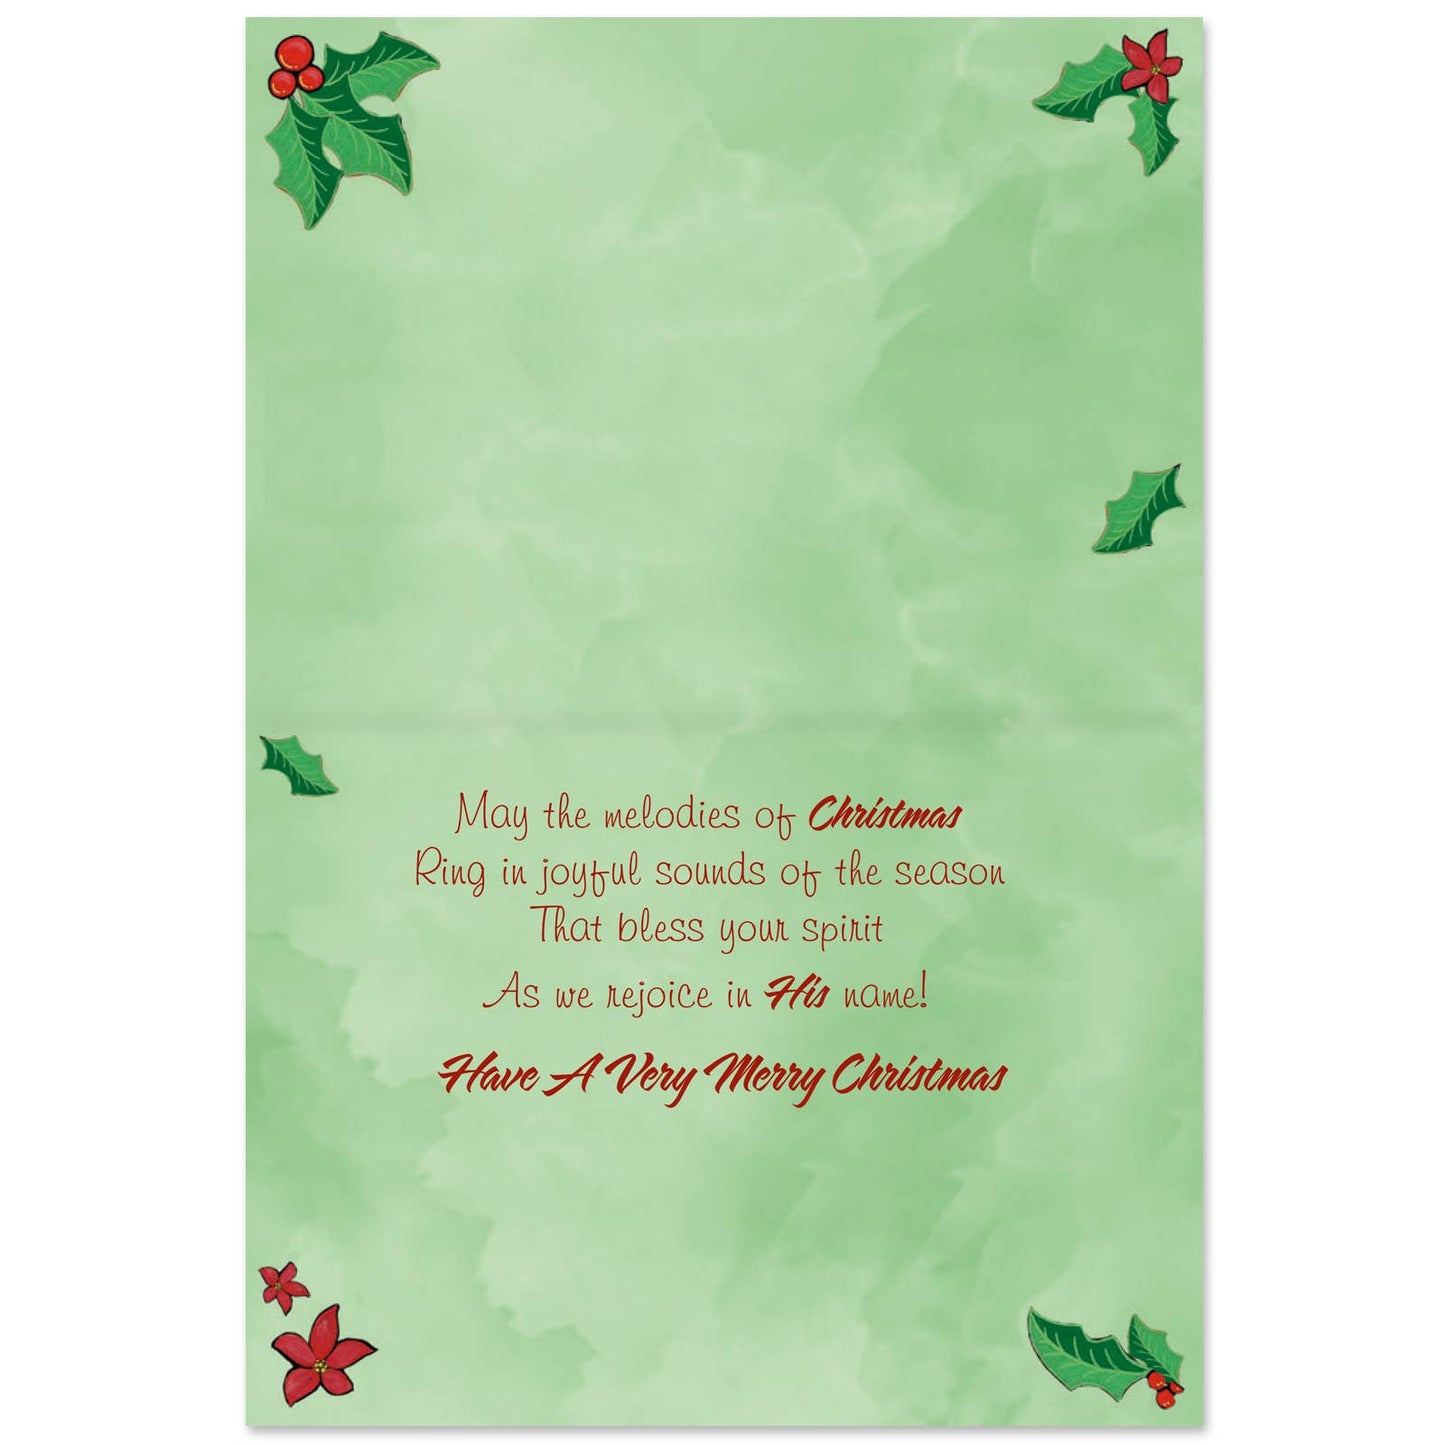 Shades of Color, LLC - Holiday Cards Christmas Melodies